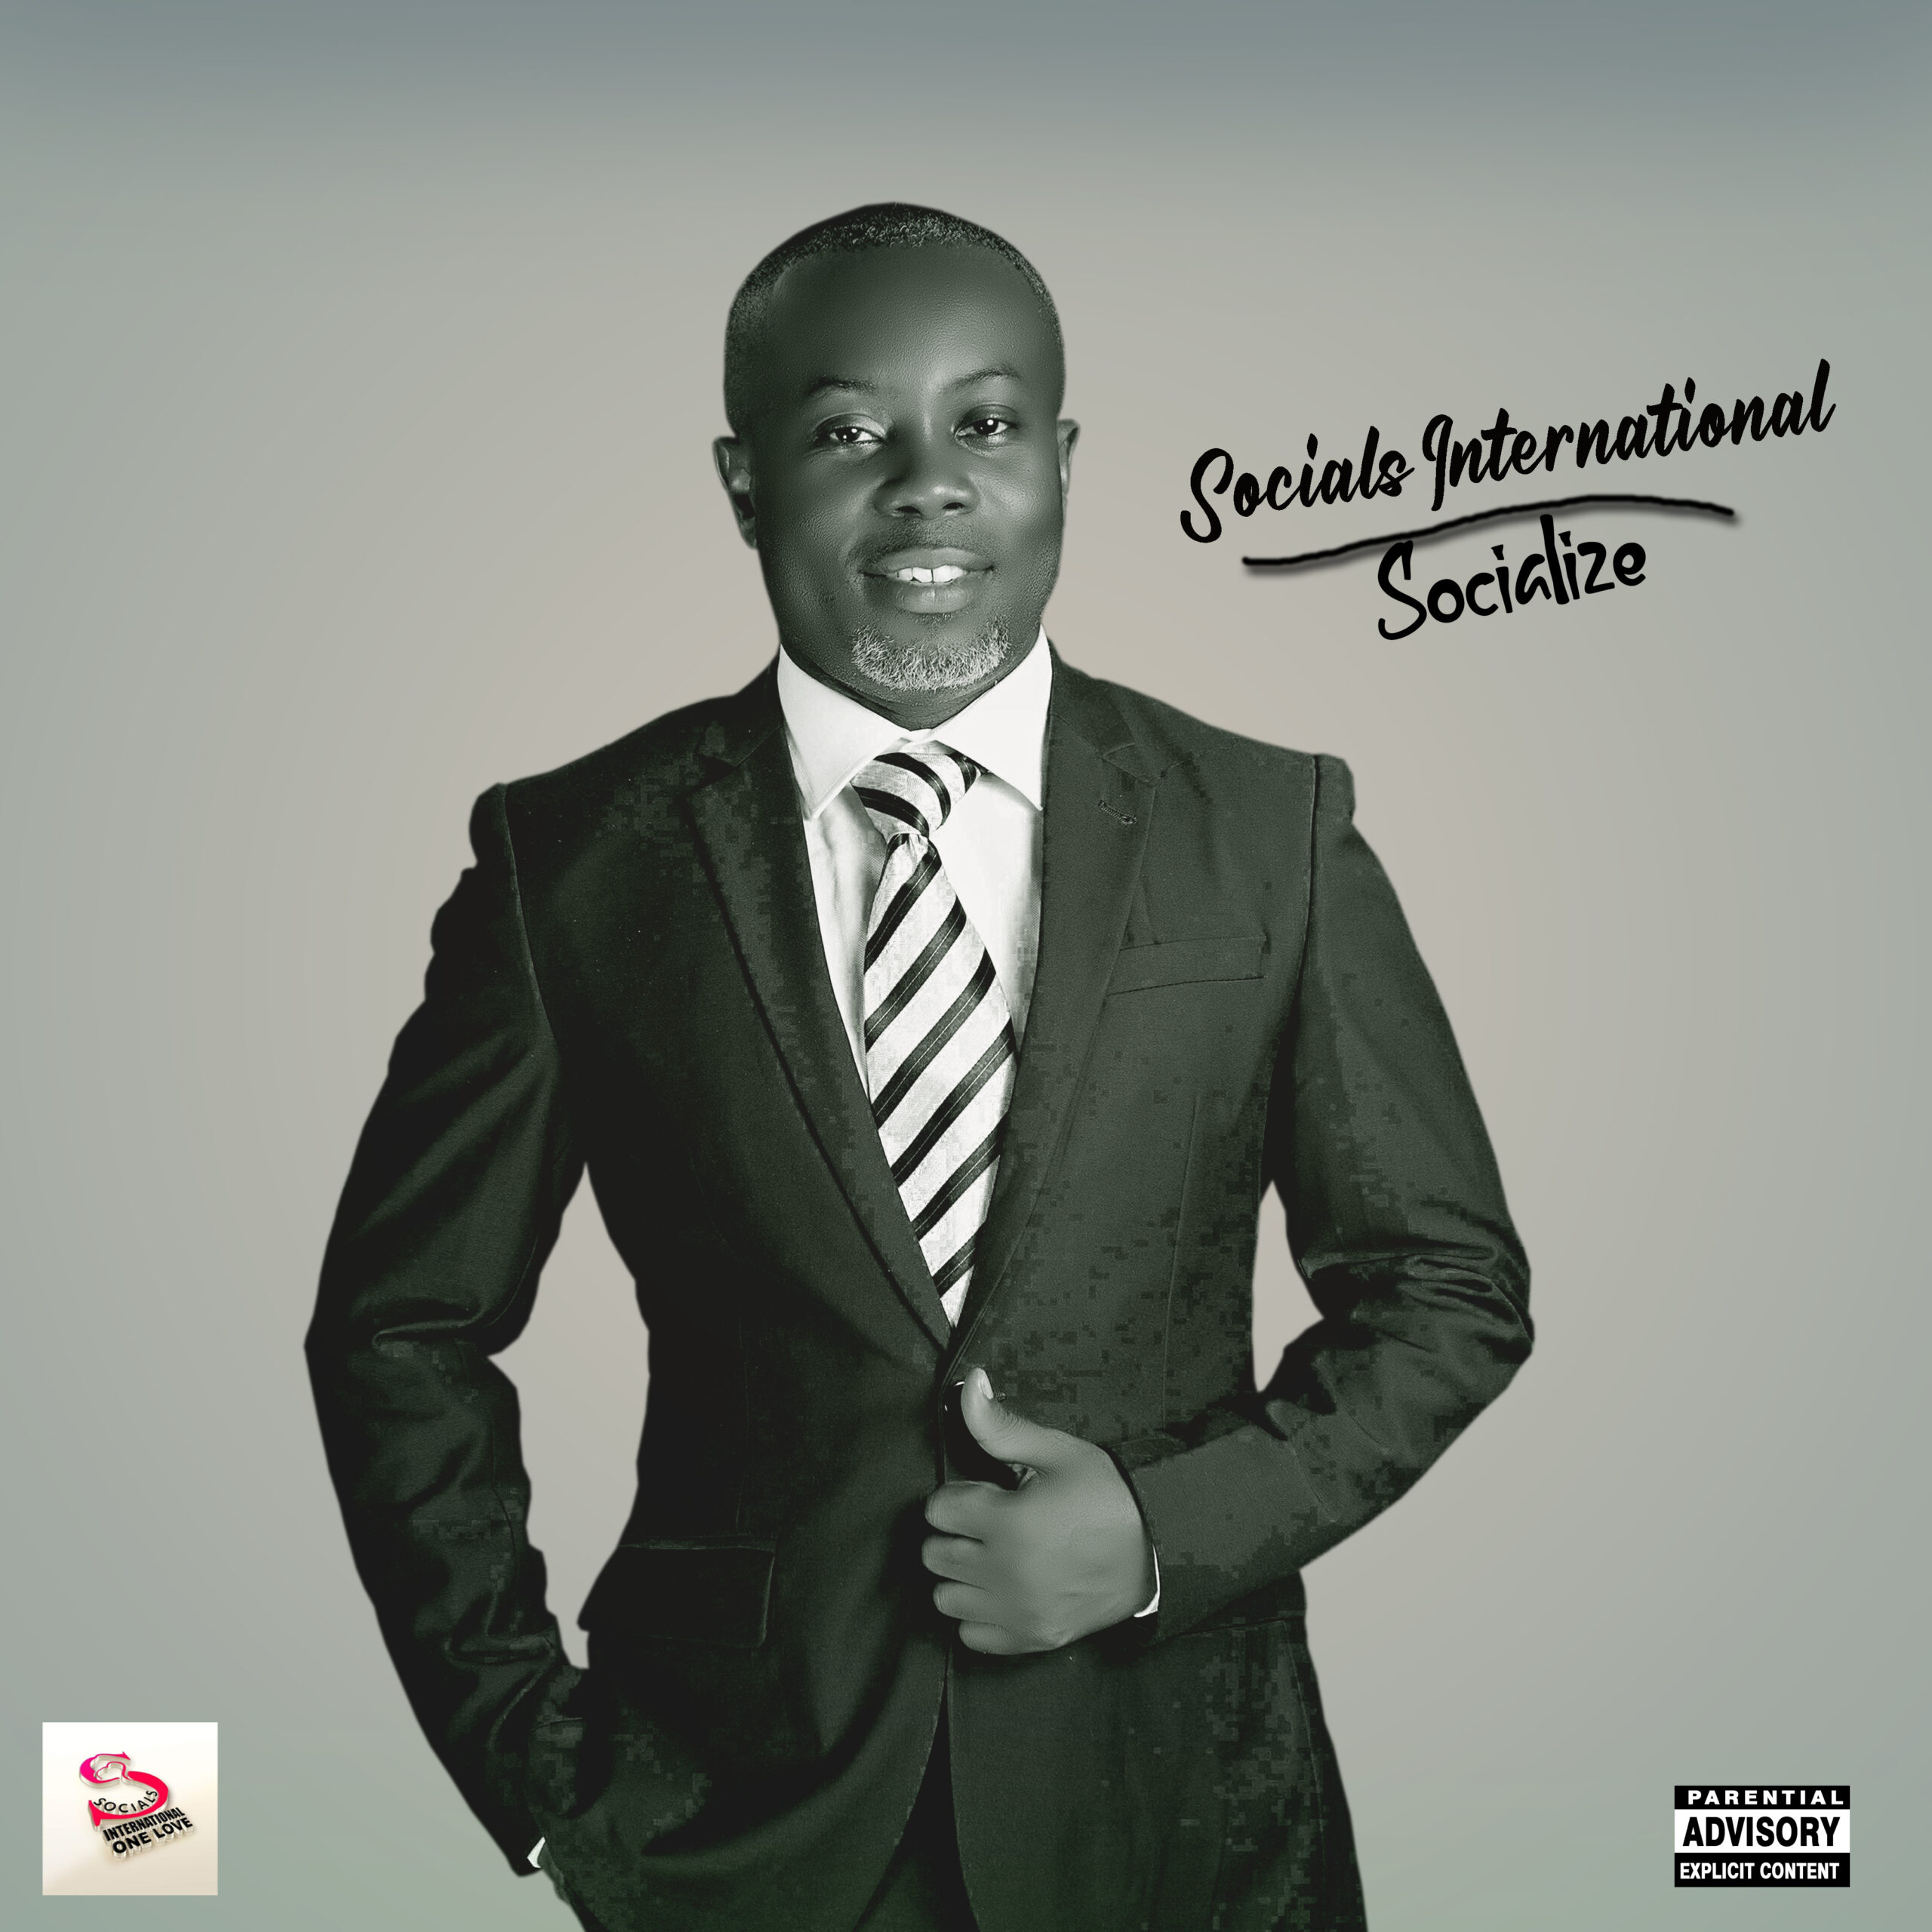 Listen To The New Socials International Album Tagged "SOCIALIZE" featuring Chiff Timz, Yawng Boss, Mas, Quiries, Arite and many more... 16